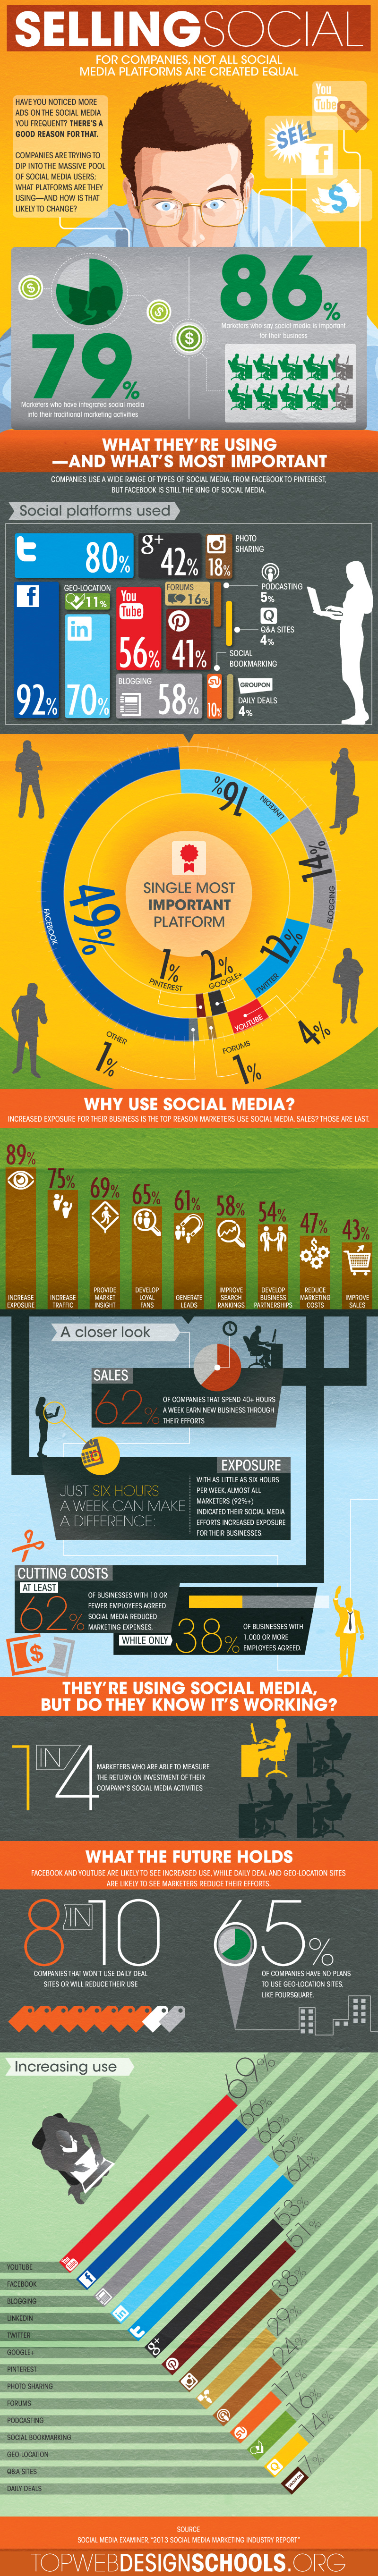 Social Media Selling — Infographic